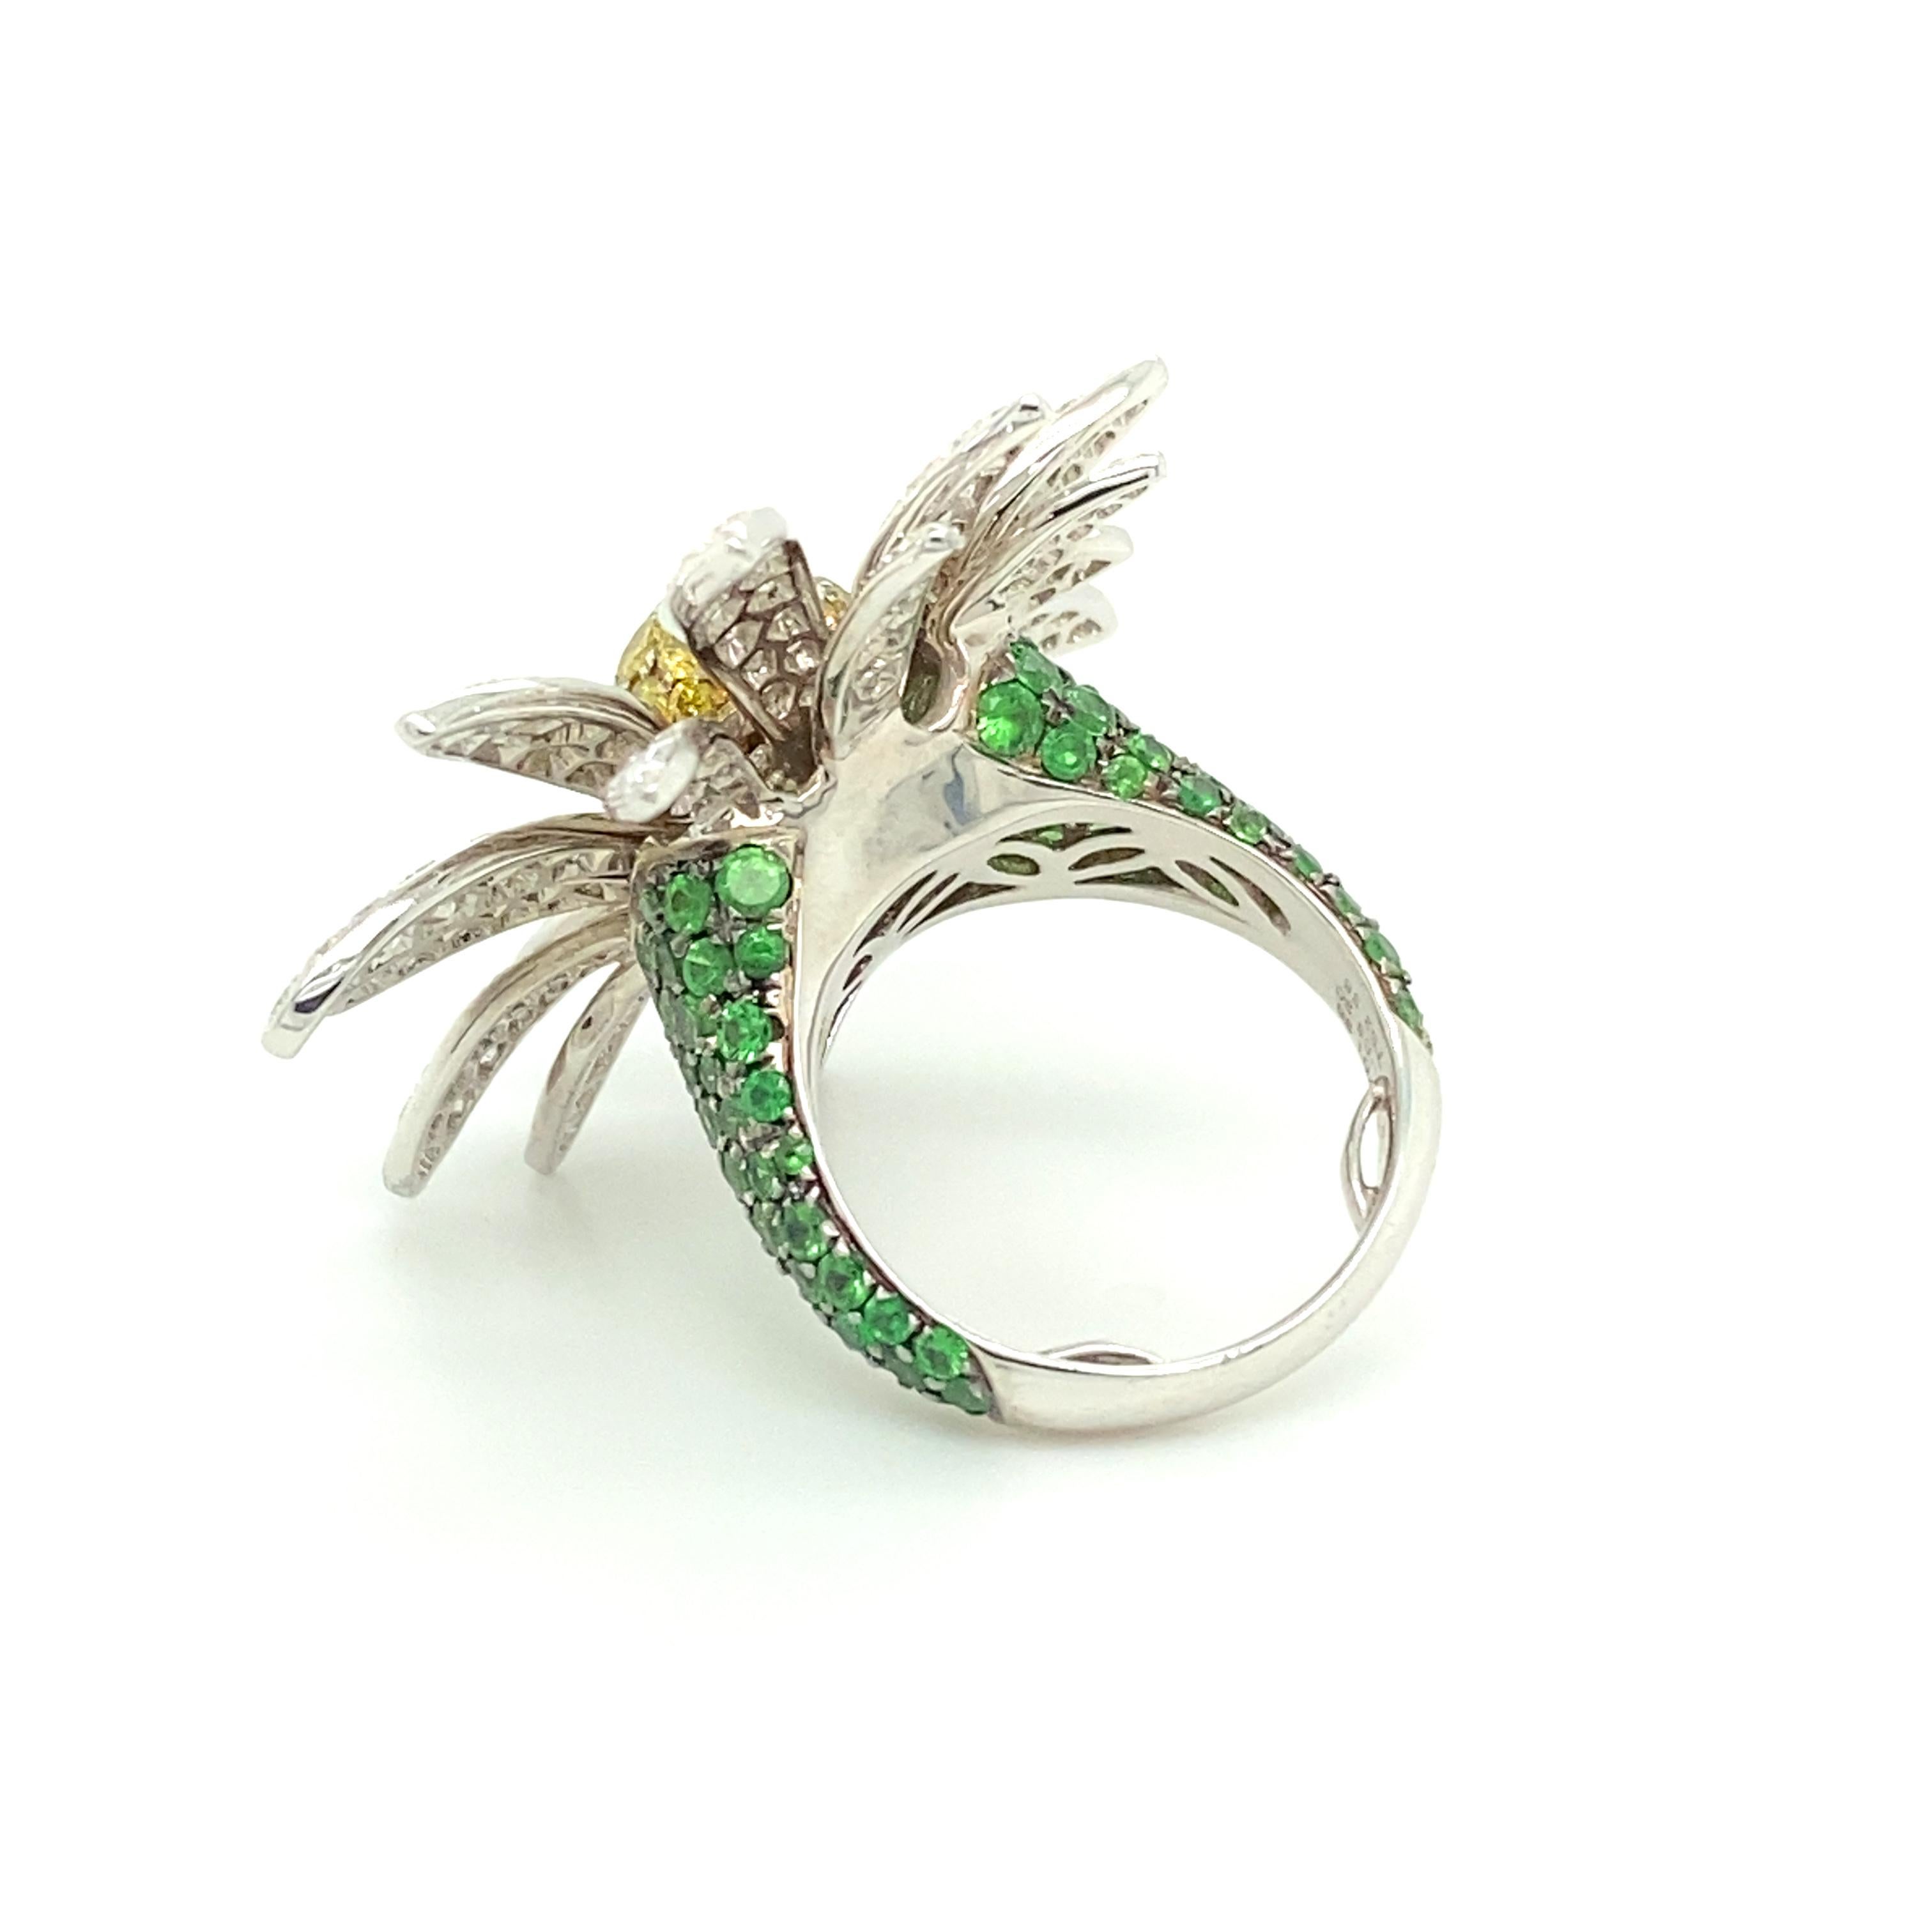 Daisy Ring with Diamonds and Tsavorites in 18 Karat White Gold by SILLAM 1835 4